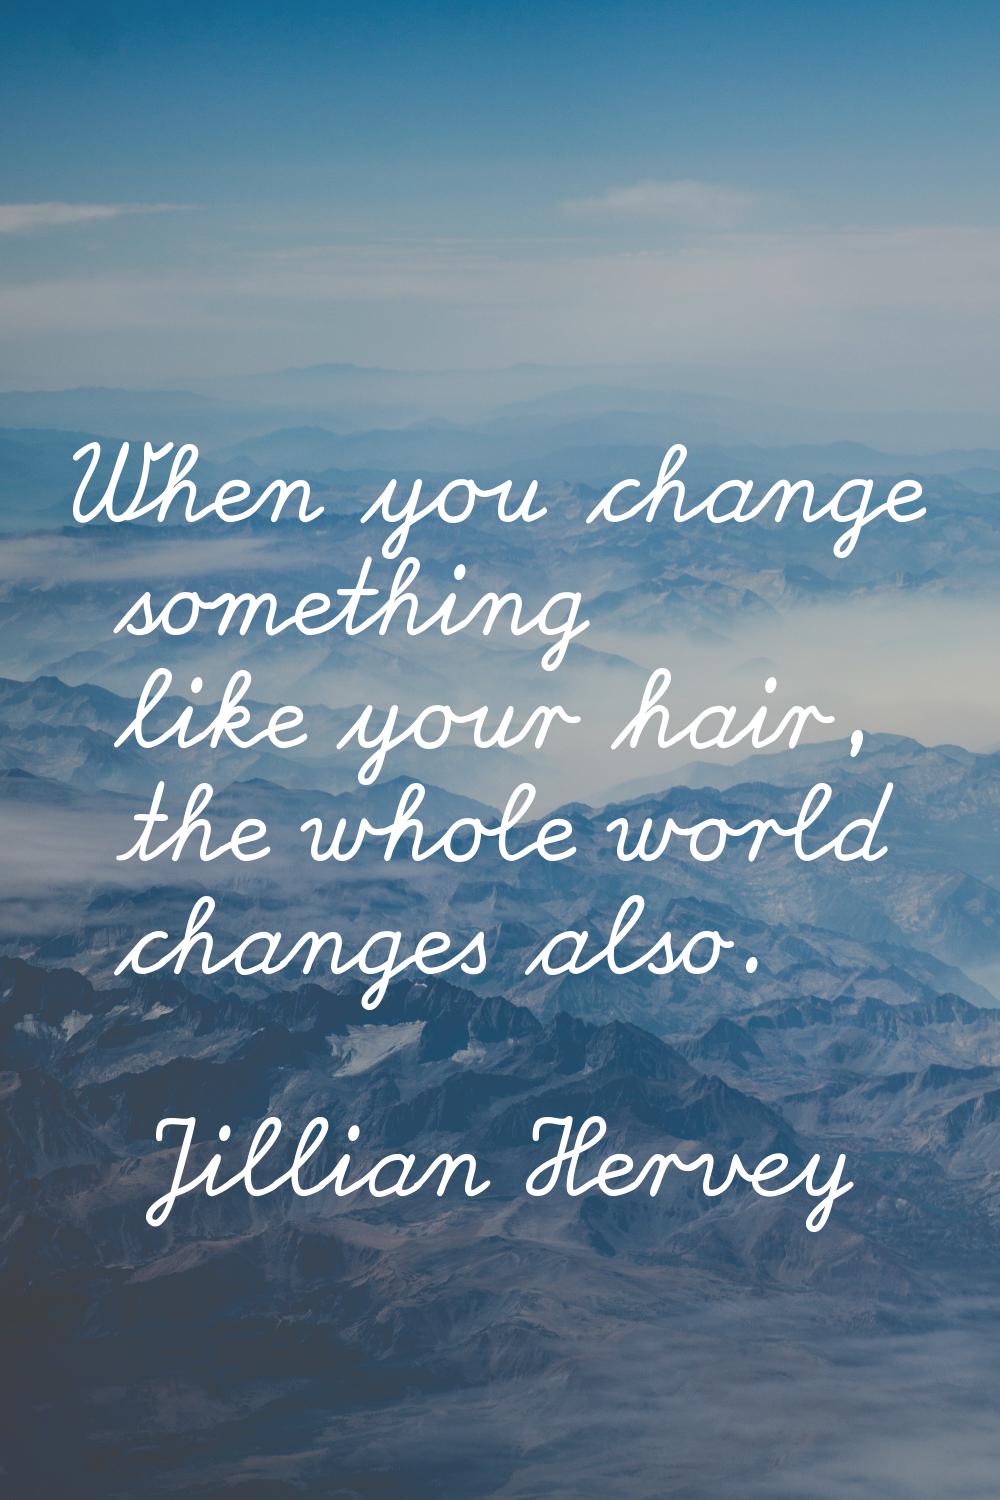 When you change something like your hair, the whole world changes also.